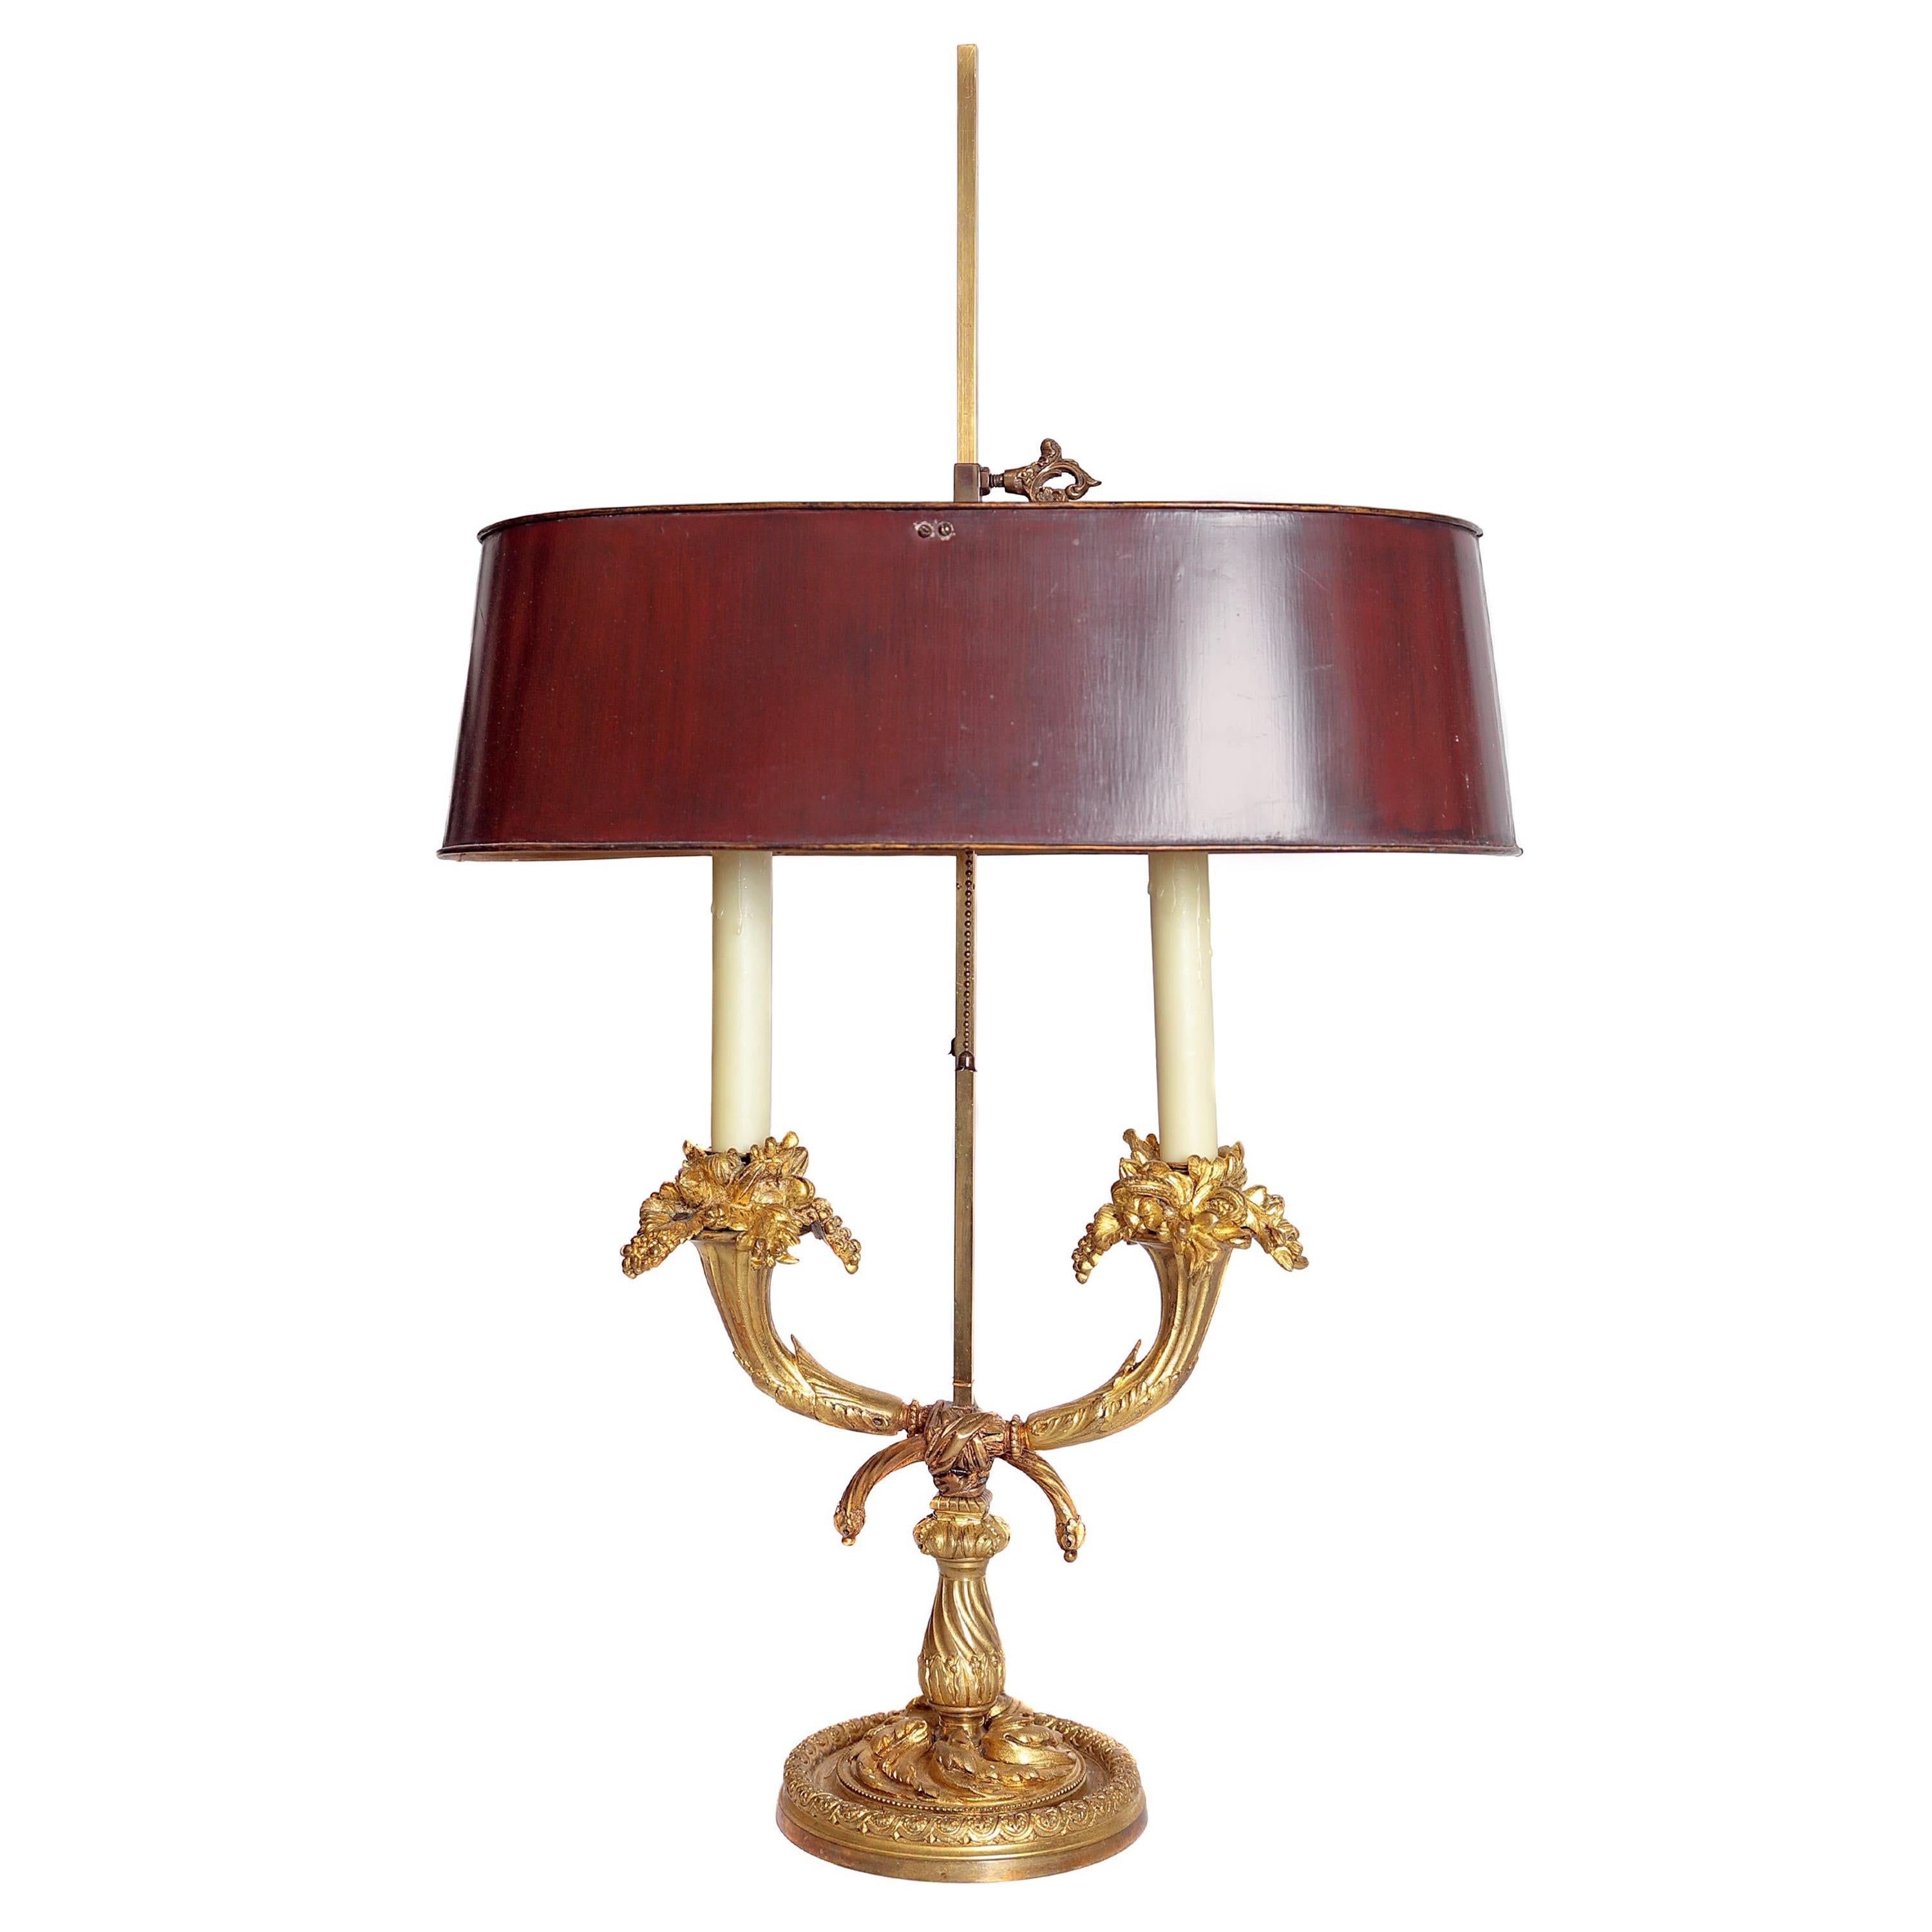 19th Century Louis XVI Style Ormolu Bouillotte Lamp with Red Tole Shade For Sale